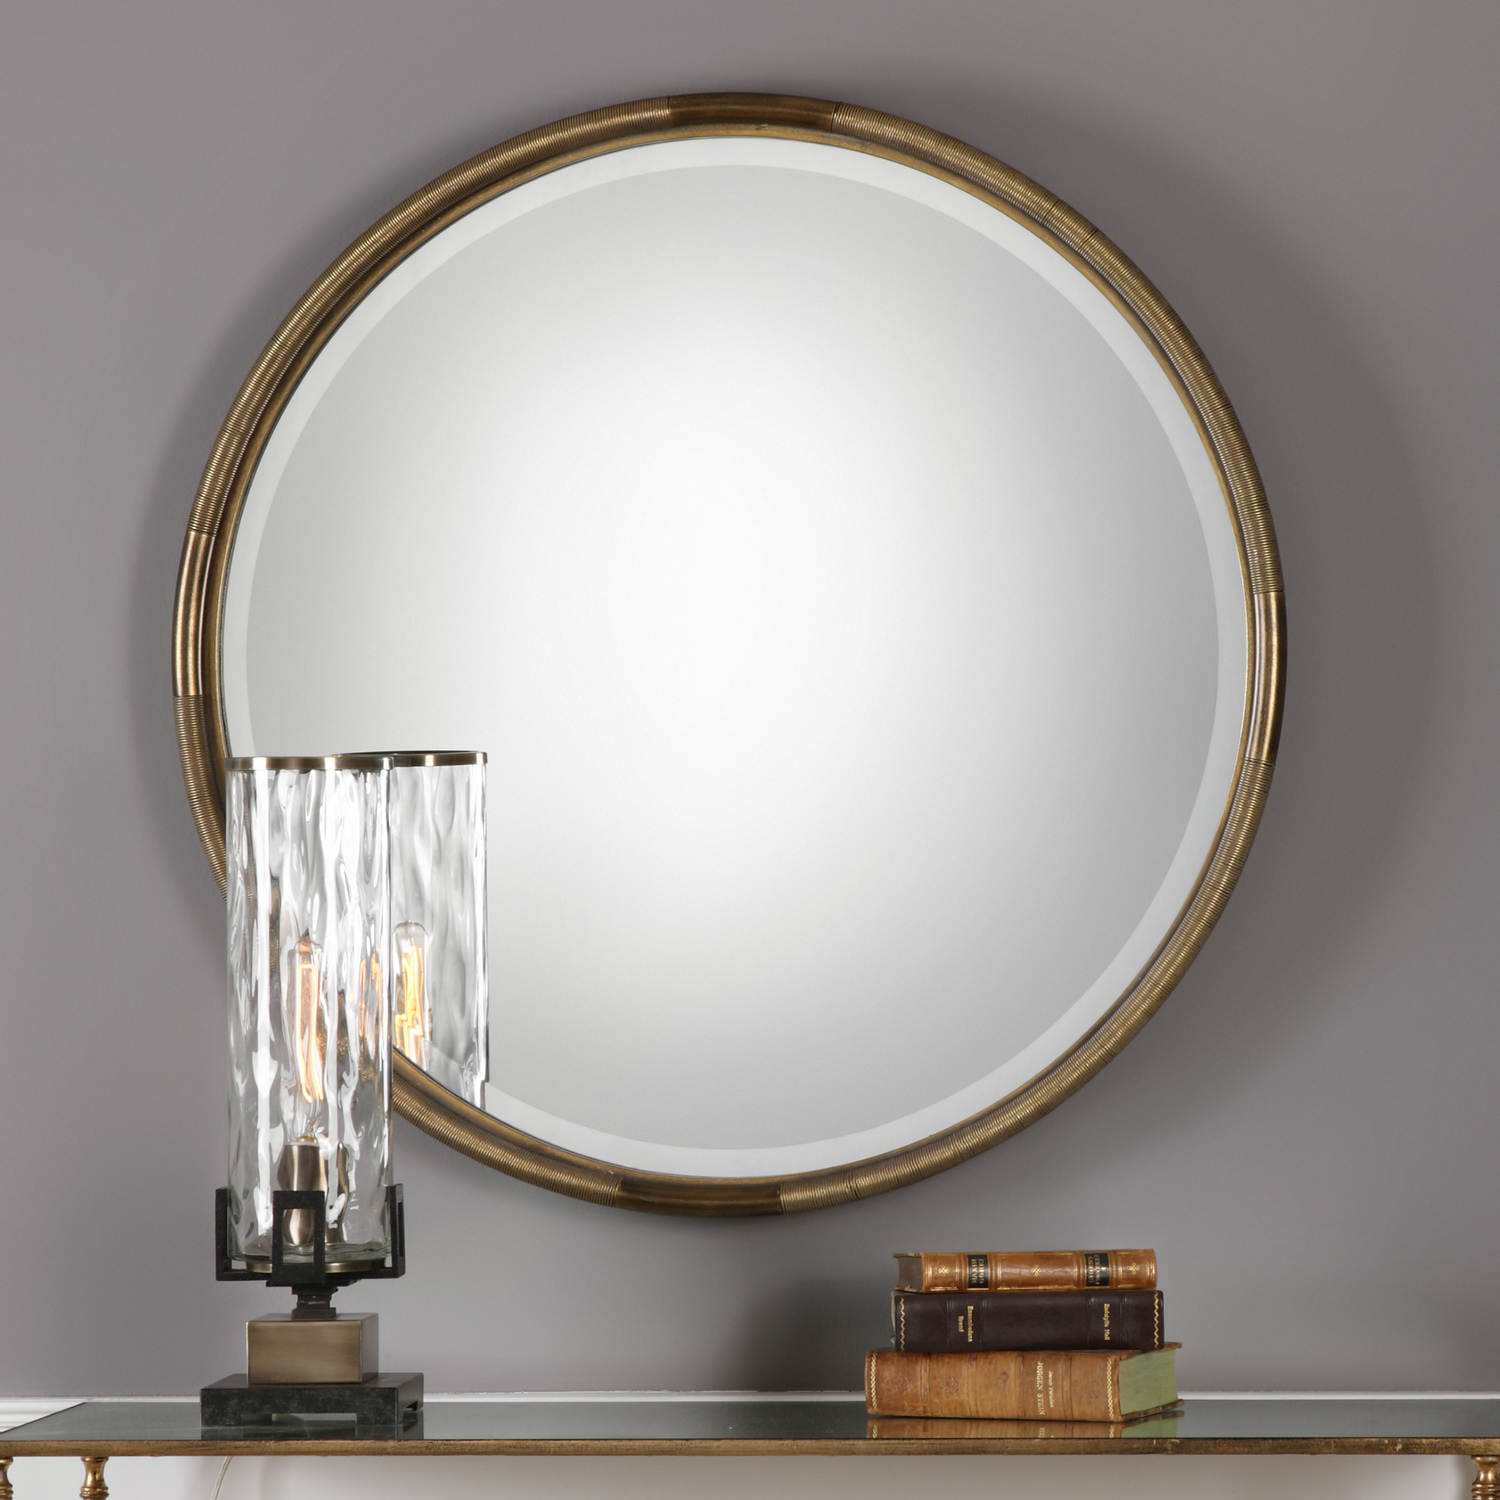 wood and mirror Uttermost Iron Coil Round Mirror Heavy Iron Coils Surround A Petite Flat Iron Inner Frame, All Hand Finished In A Lightly Antiqued Gold Leaf.